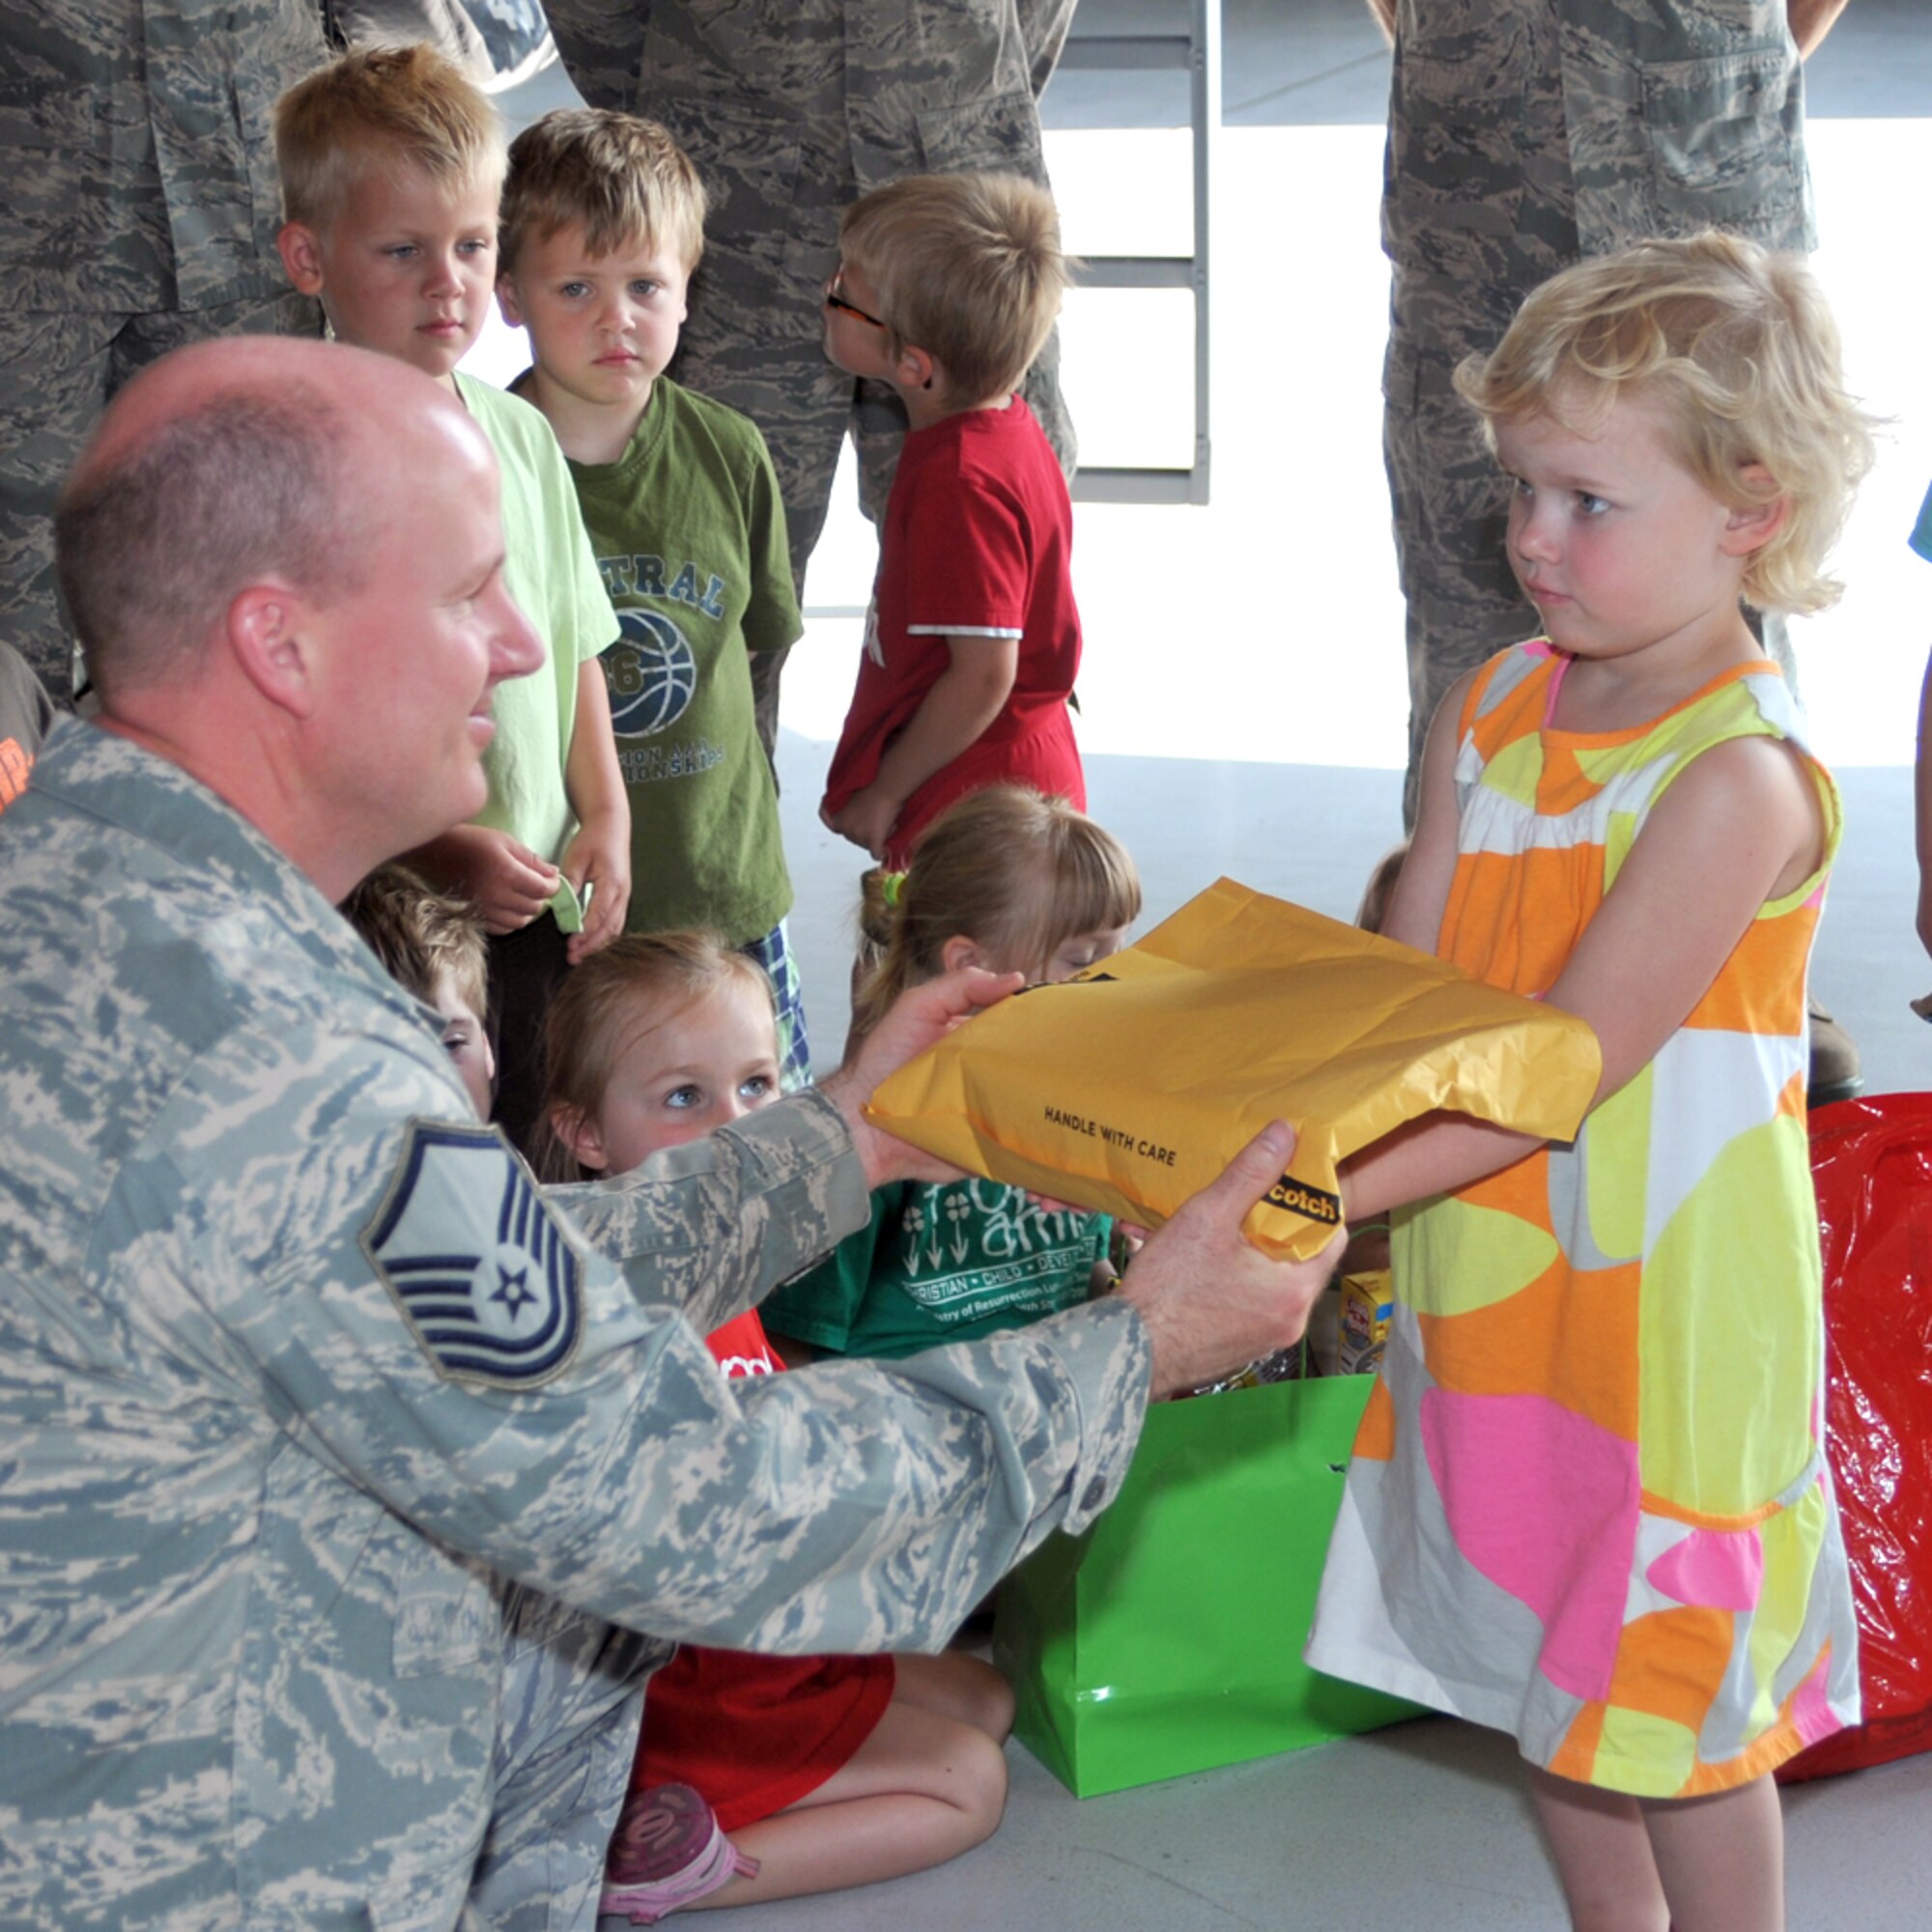 Master Sgt. Thomas Mitchell, 114th Maintenance Squadron, recieves a care package from Rowan Alberts at Joe Foss Field, S.D. June 7.  Rowan and other children from the Open Arms Christian Child Center visited the base to distribute care packages they put together for deployed members. (Air Force photo by Master Sgt. Nancy Ausland)(RELEASED)